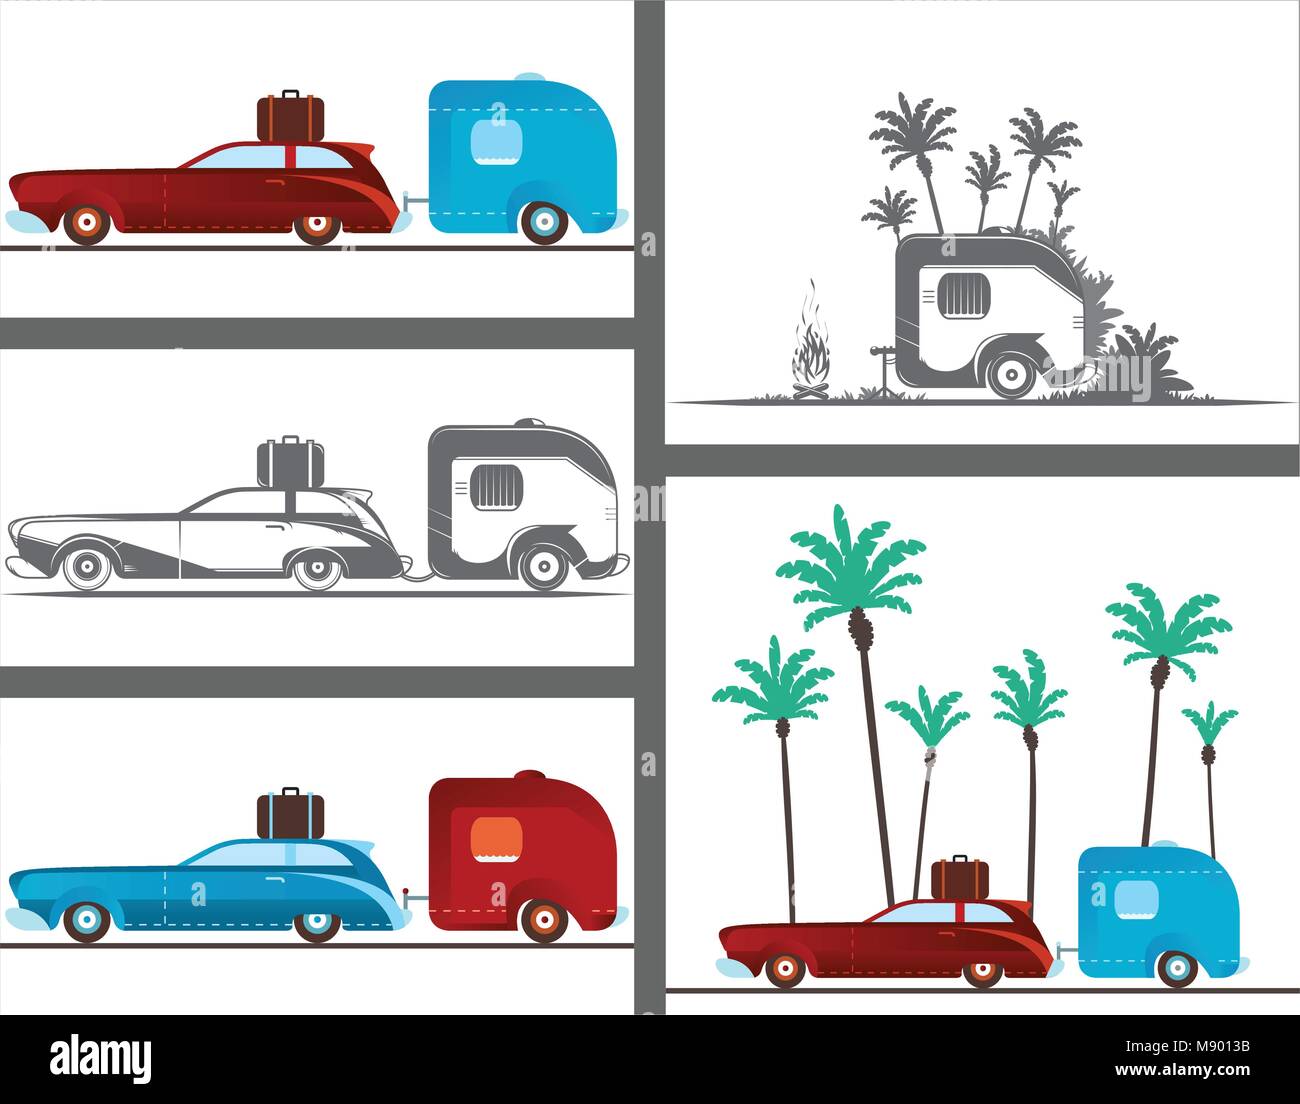 Vintage camping trailer and camping car. Stock Vector